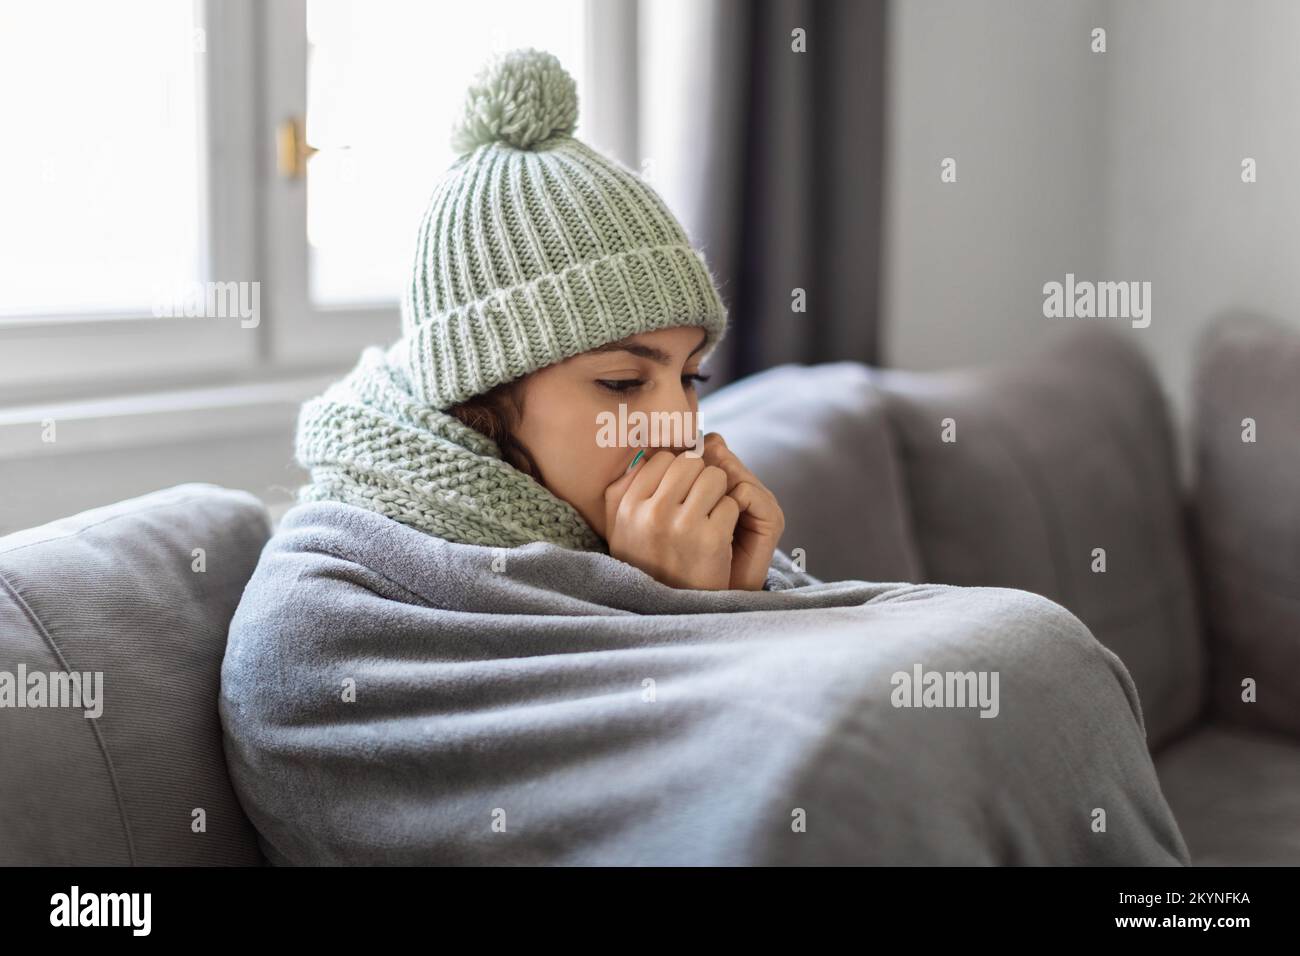 Heating Problems. Closeup Shot Of Young Woman Freezing At Home Stock Photo